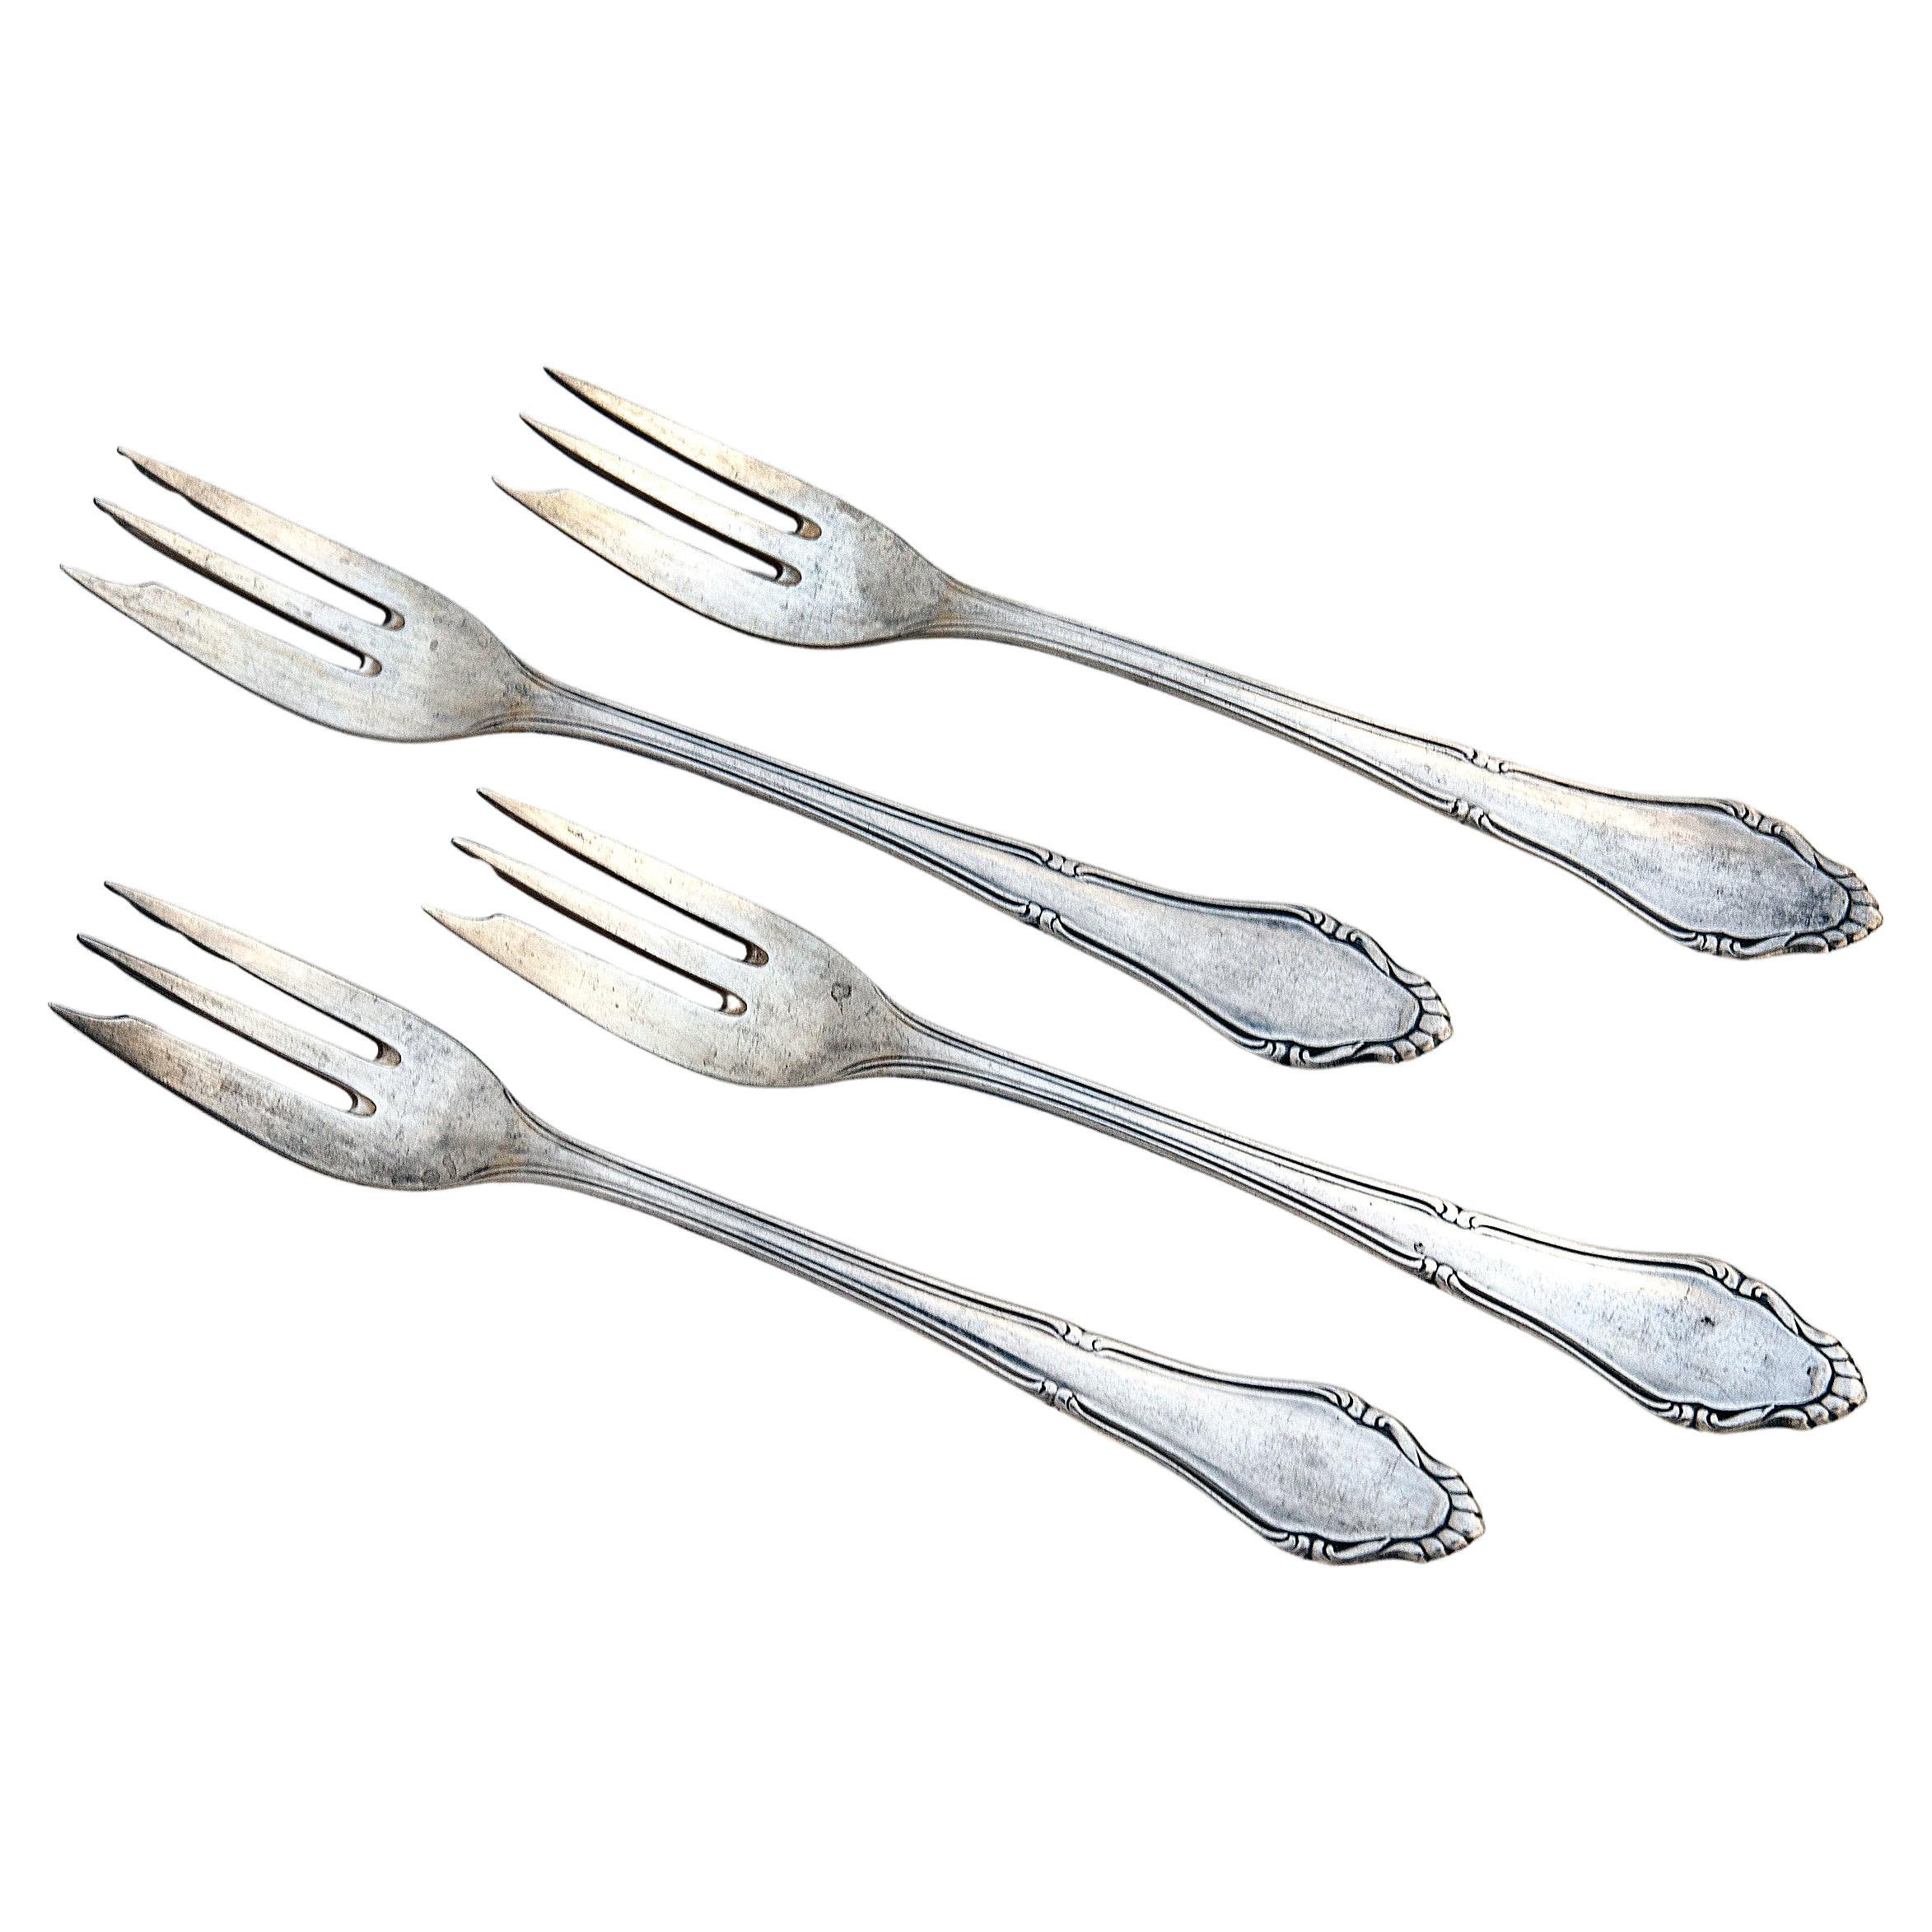 German Silver-plate cake forks with a lovely cake server.
This flatware set is from one of the oldest & finest silverplate manufacturers in Germany. On separate listings, you will find knives, spoons both large & small & serving pieces as well.
